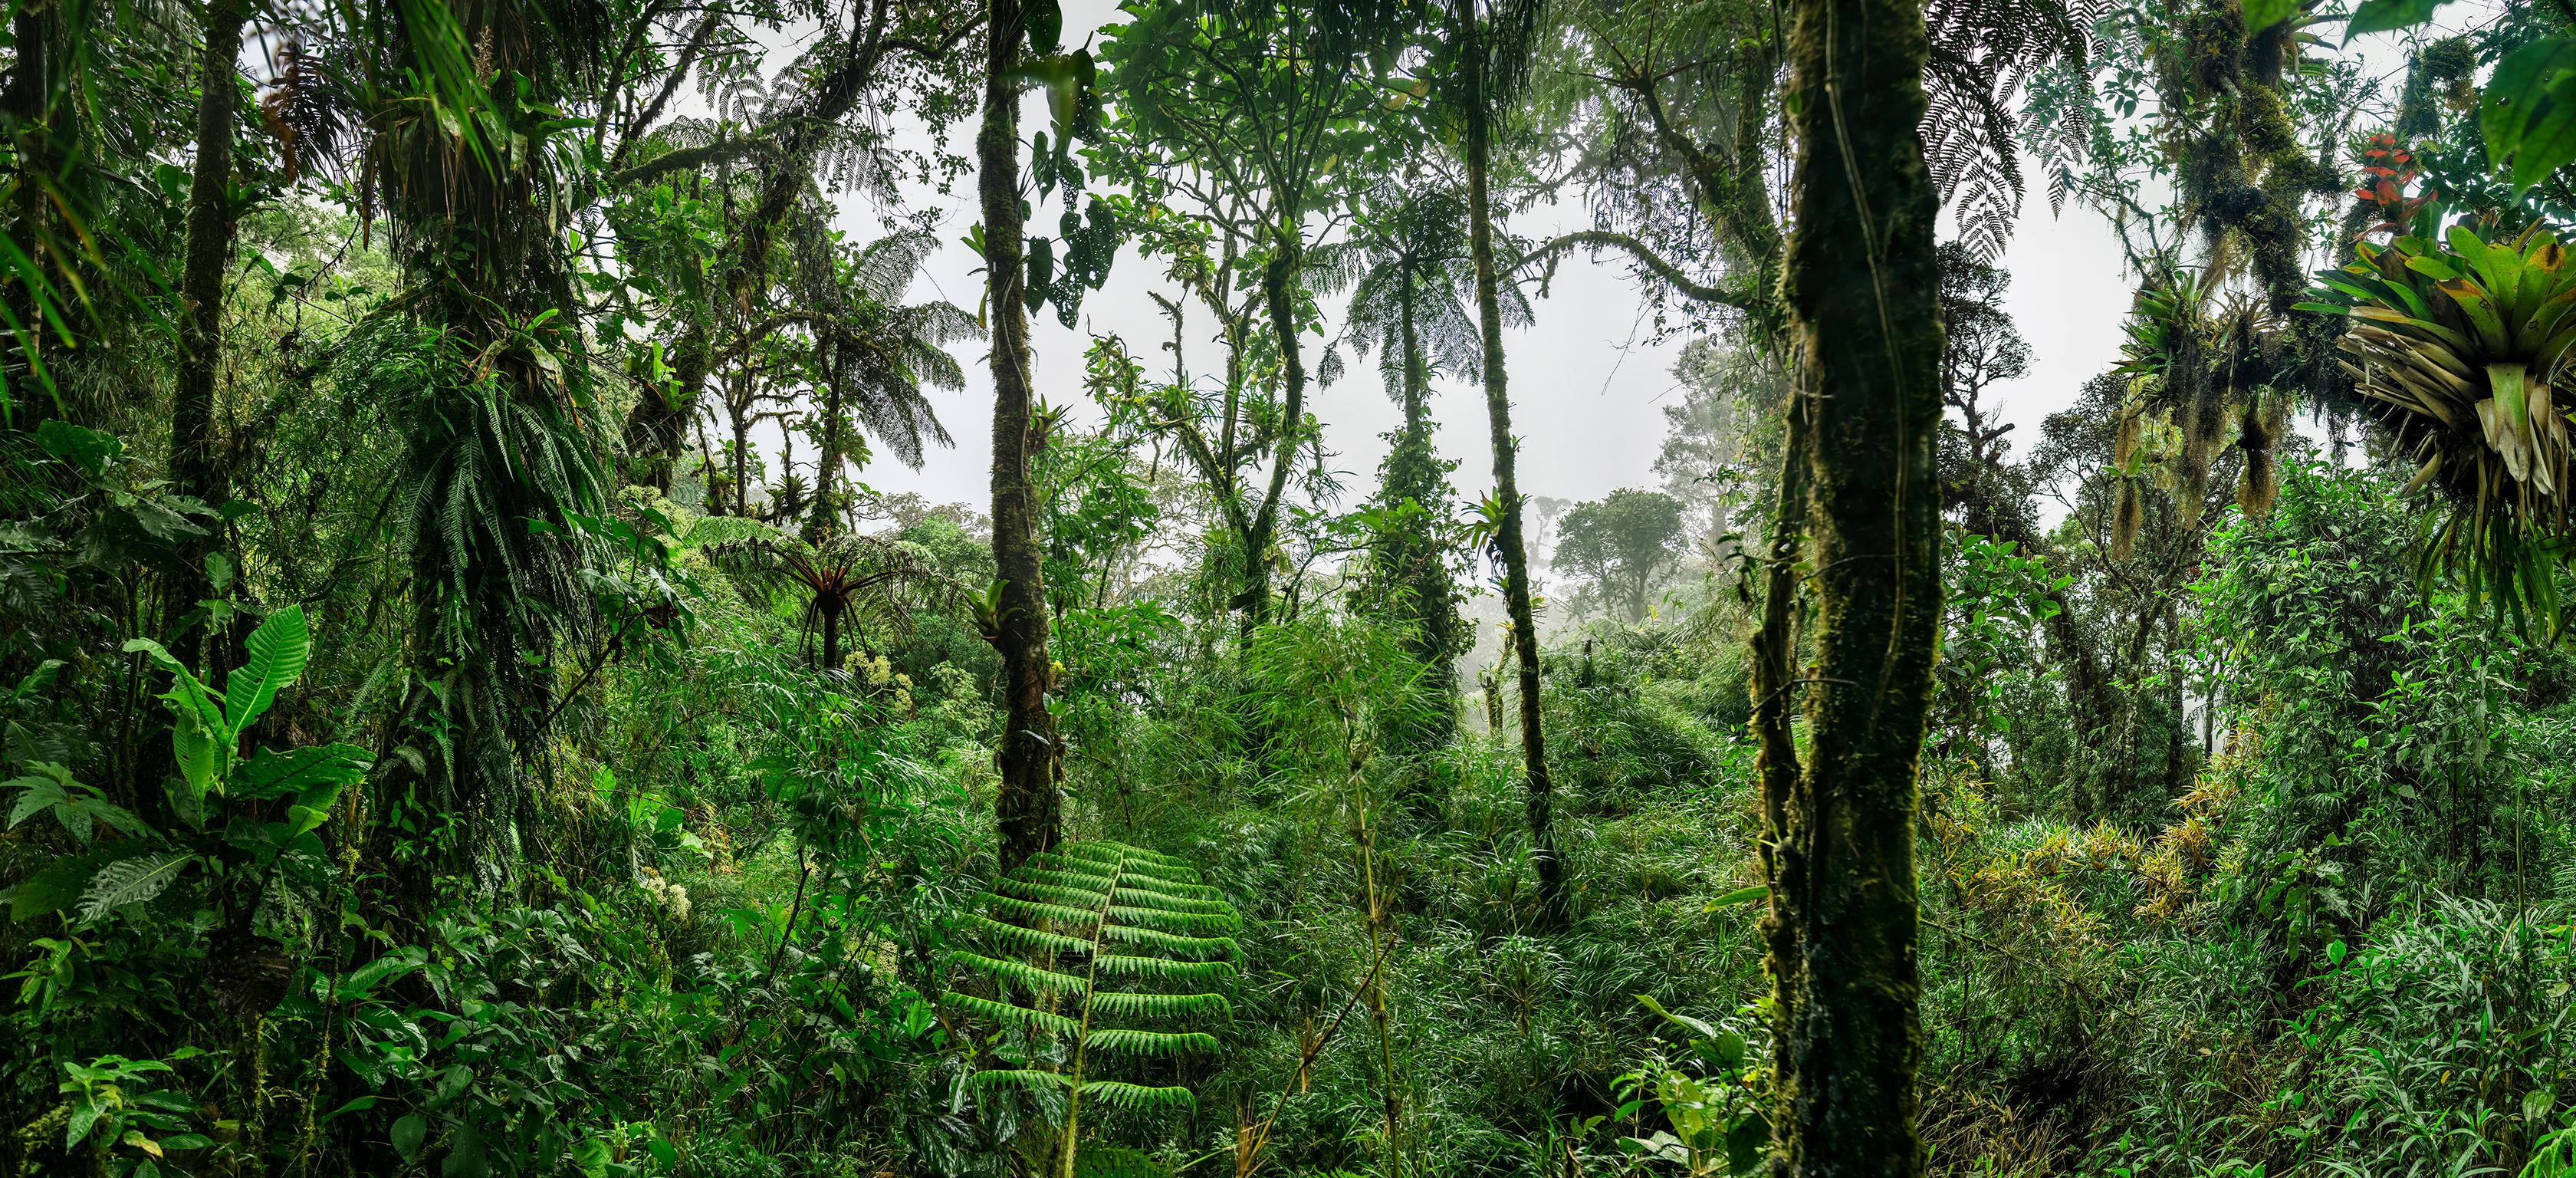 Cloud Forest III  - large format photograph of fantastical tropical rainforest